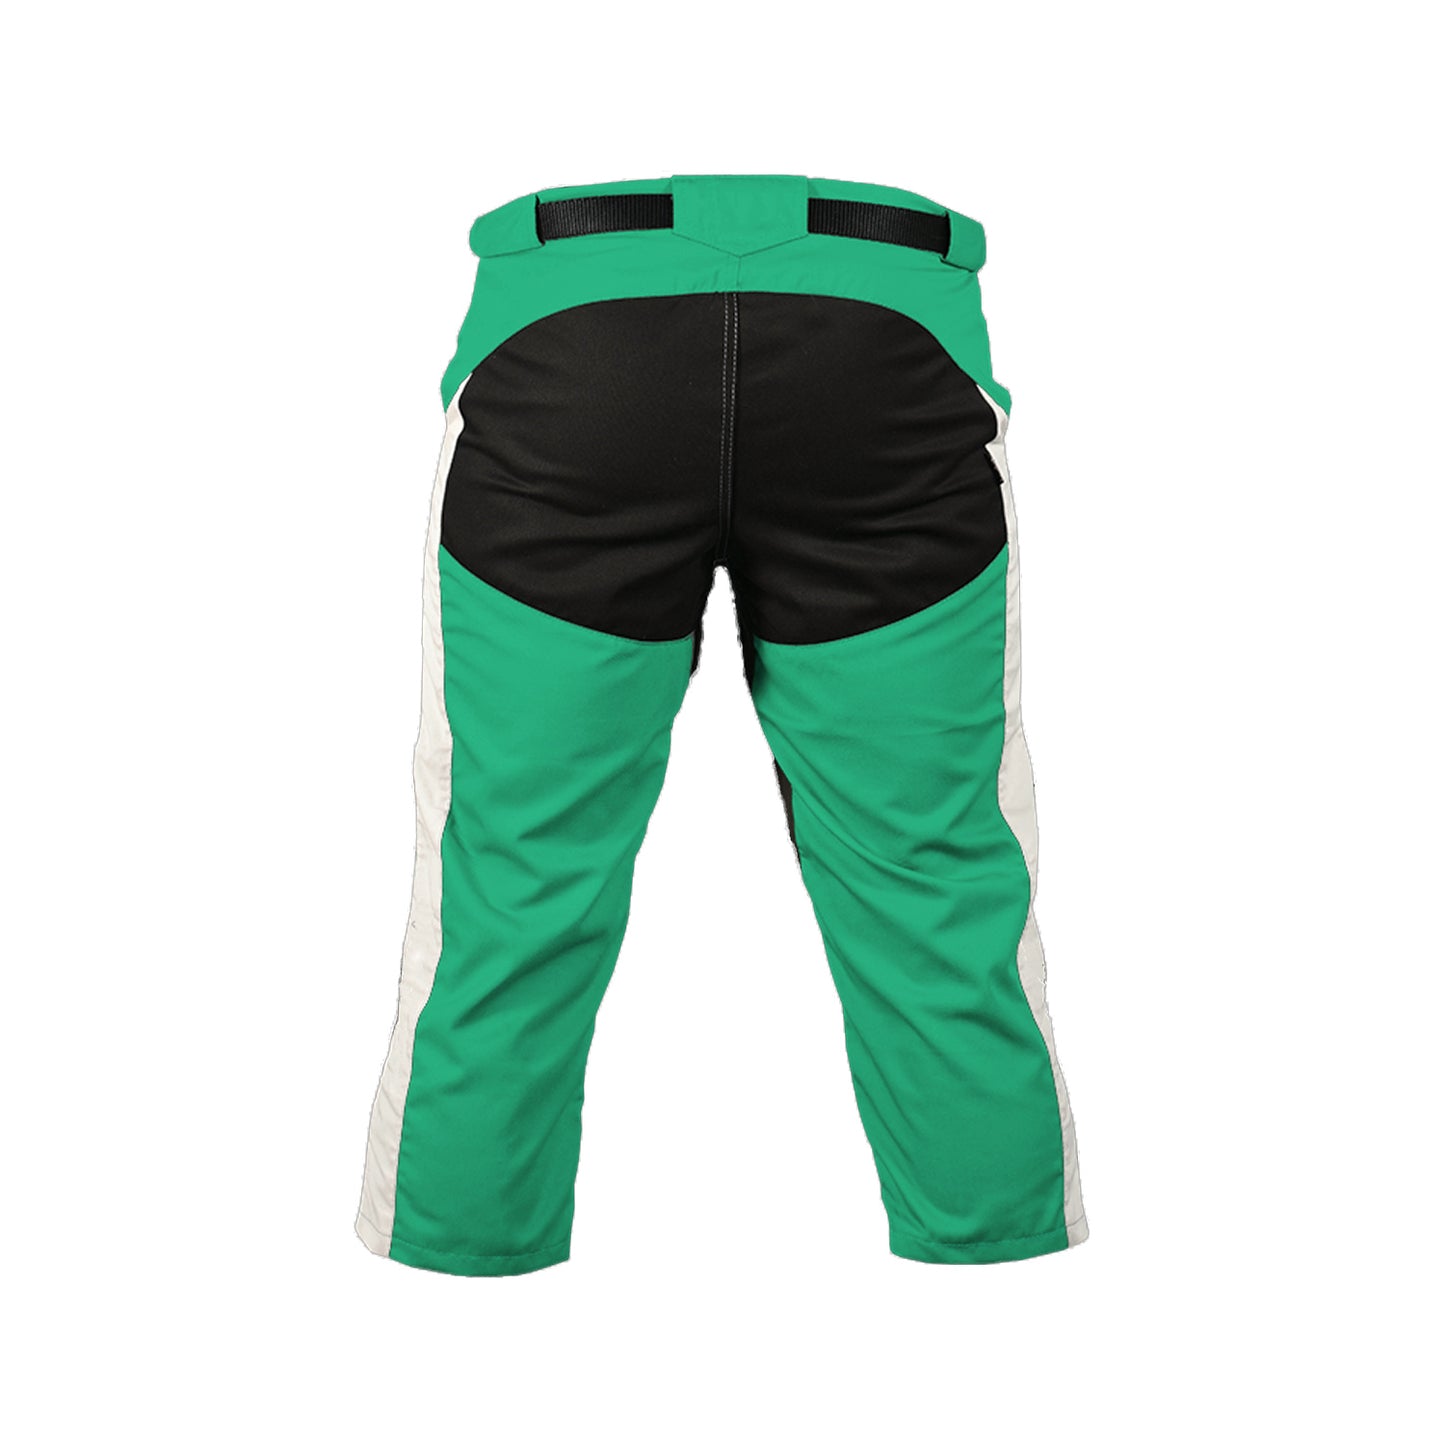 Skydiving Swoop Short Turquoise SP-22